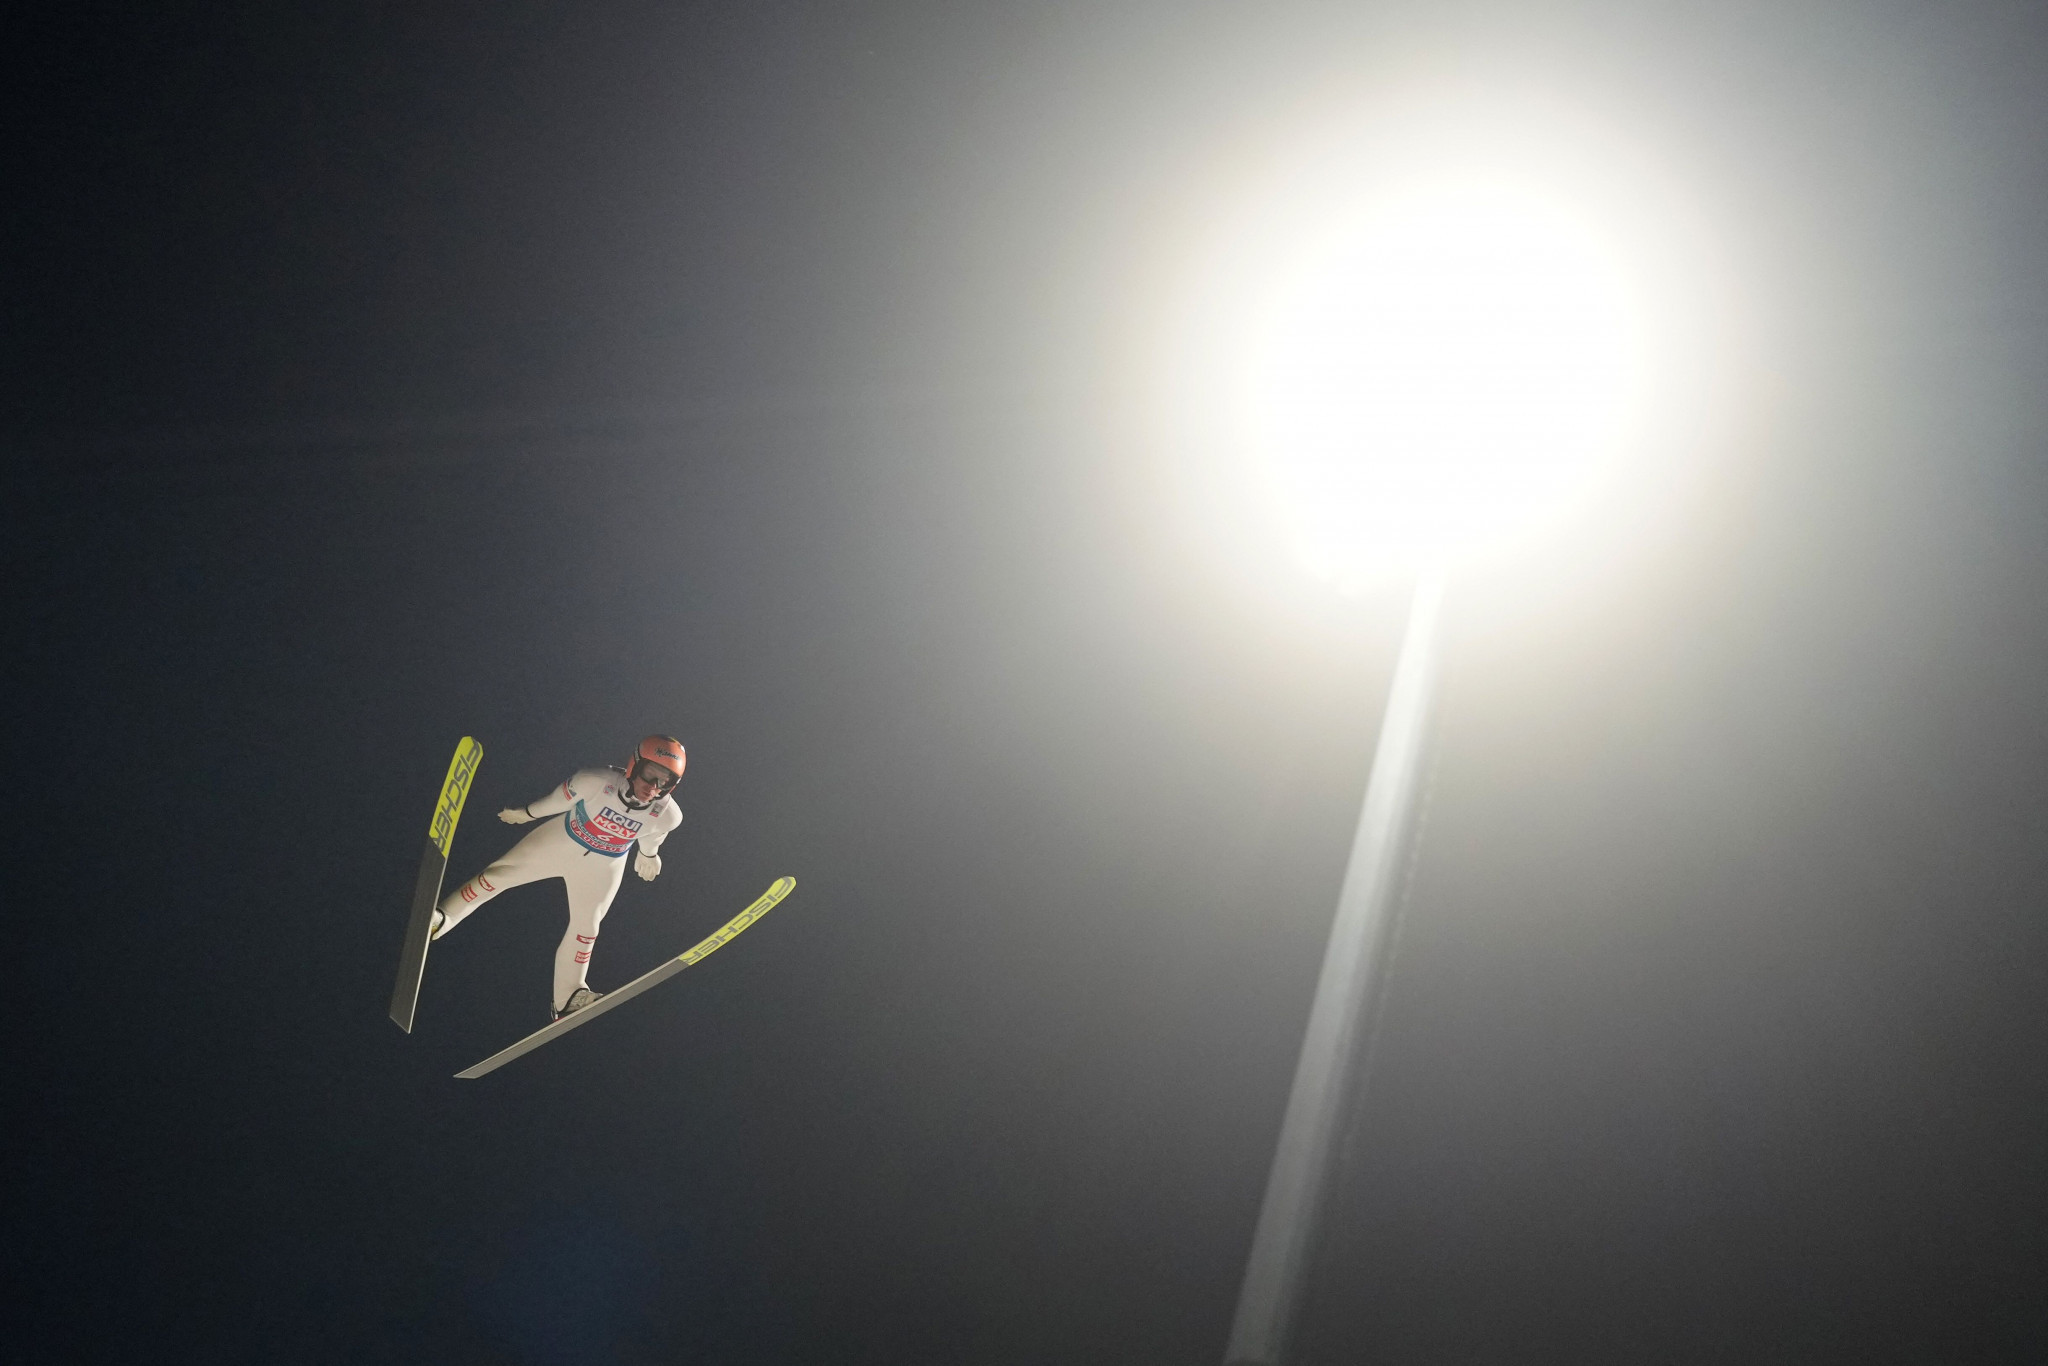 Stefan Kraft performed the last jump for Austria in their successful men's team competition ©Getty Images